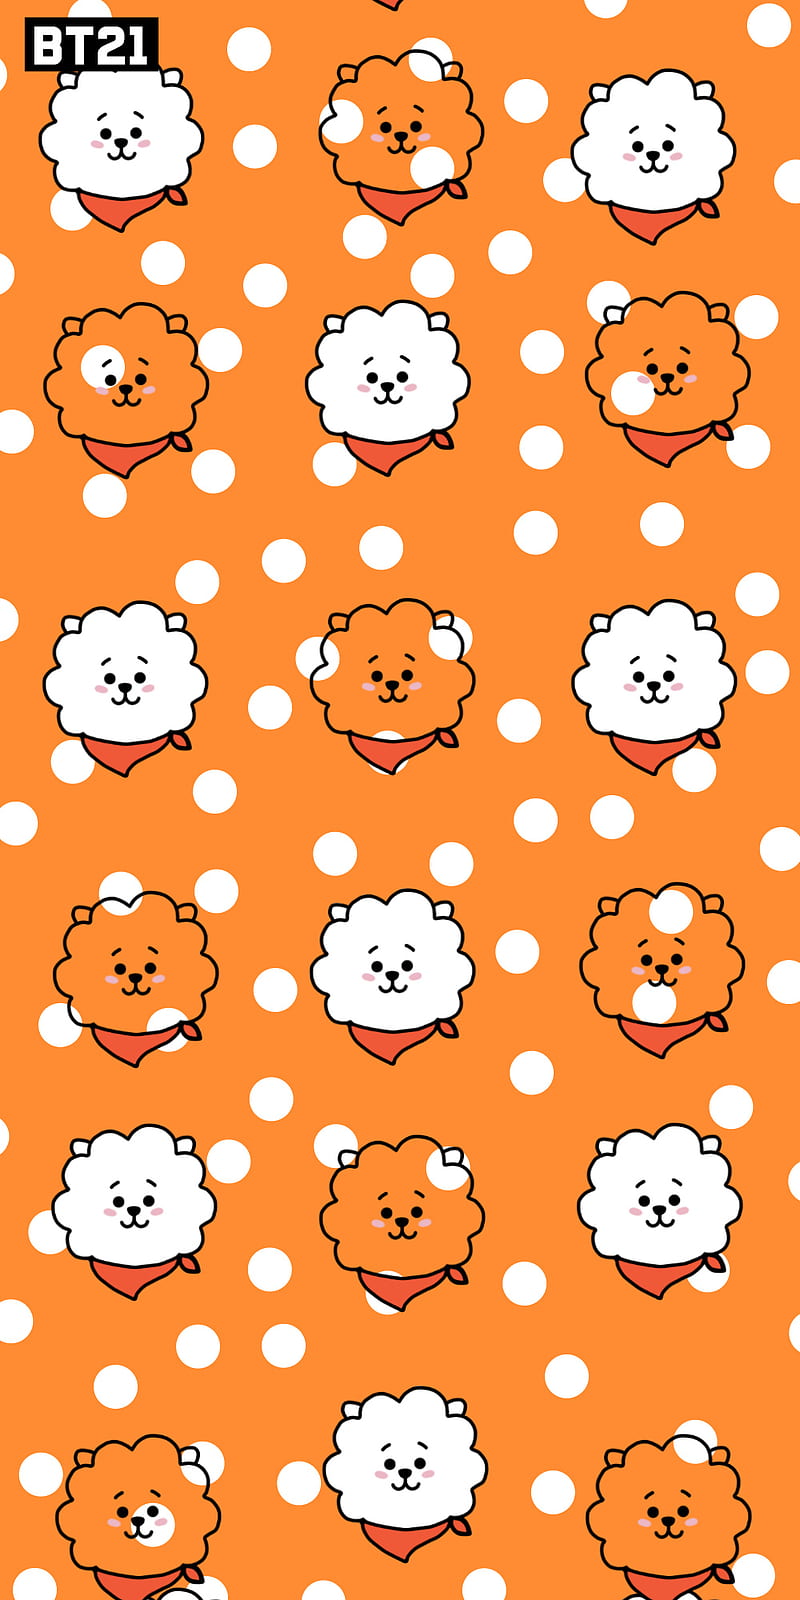 JinCrave on X We found some RJ RK BT21 wallpapers and thought we  should share these with you guys  Adorable arent they   httpstcoEUAObTCmuU  X